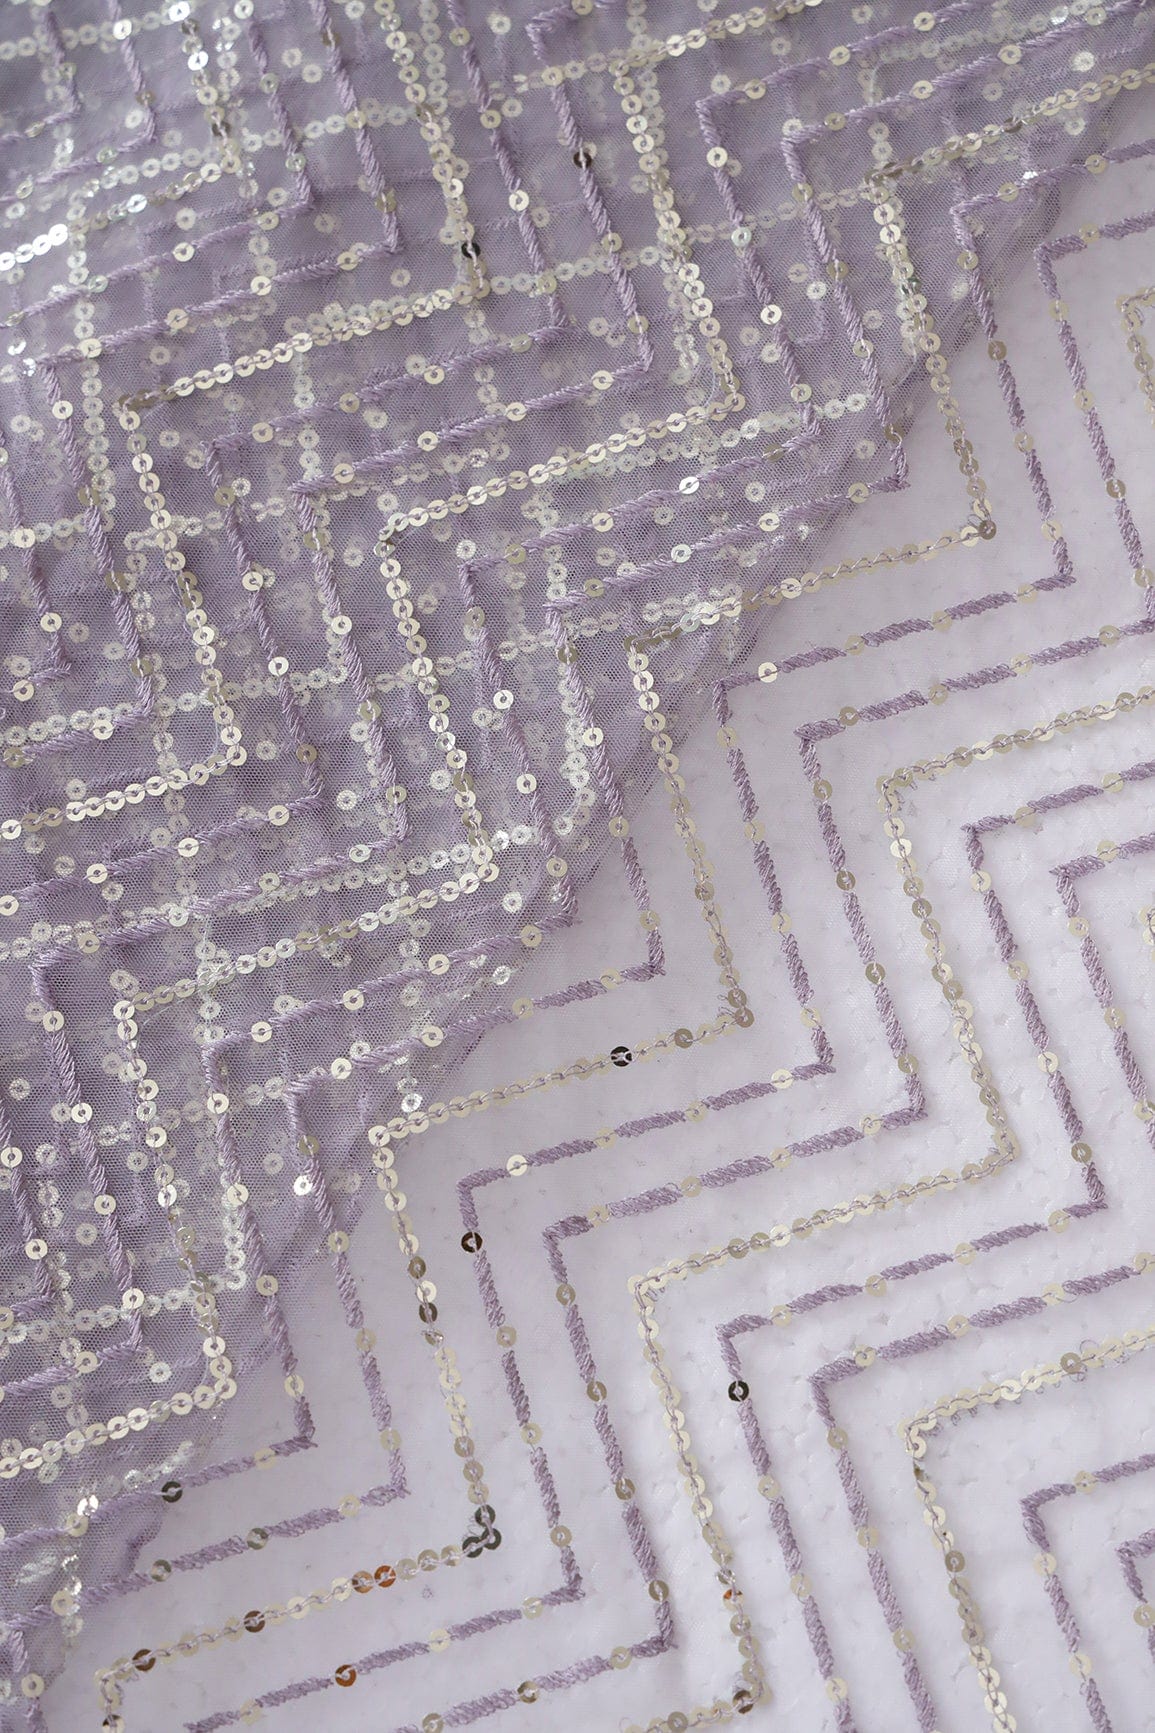 doeraa Embroidery Fabrics 2.25 Meter Cut Piece Of Gold Sequins With Lavender Thread Chevron Embroidery Work On Lavender Soft Net Fabric